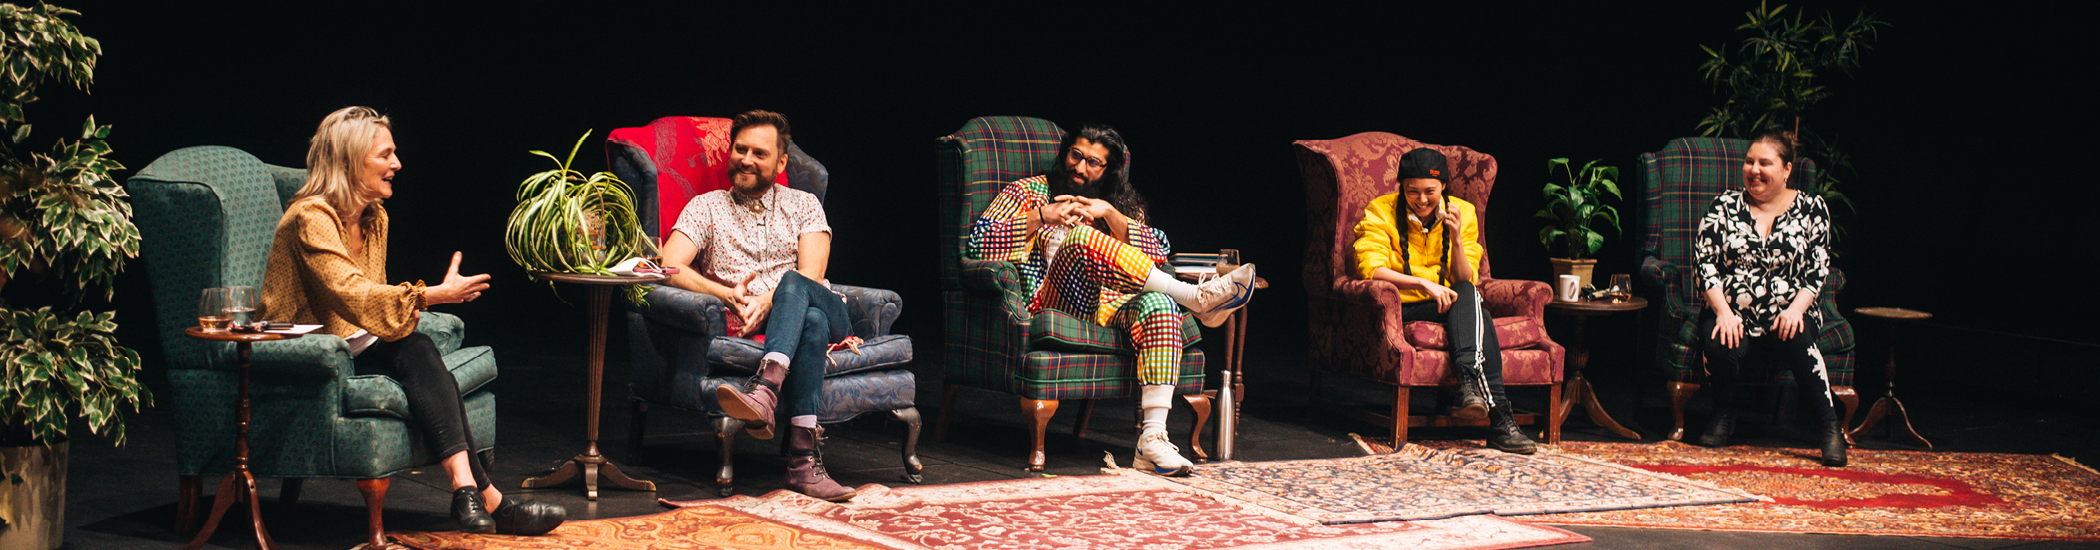 Five panelists sit onstage in armchairs of varied, colourful patterns, smiling and engaging in conversation